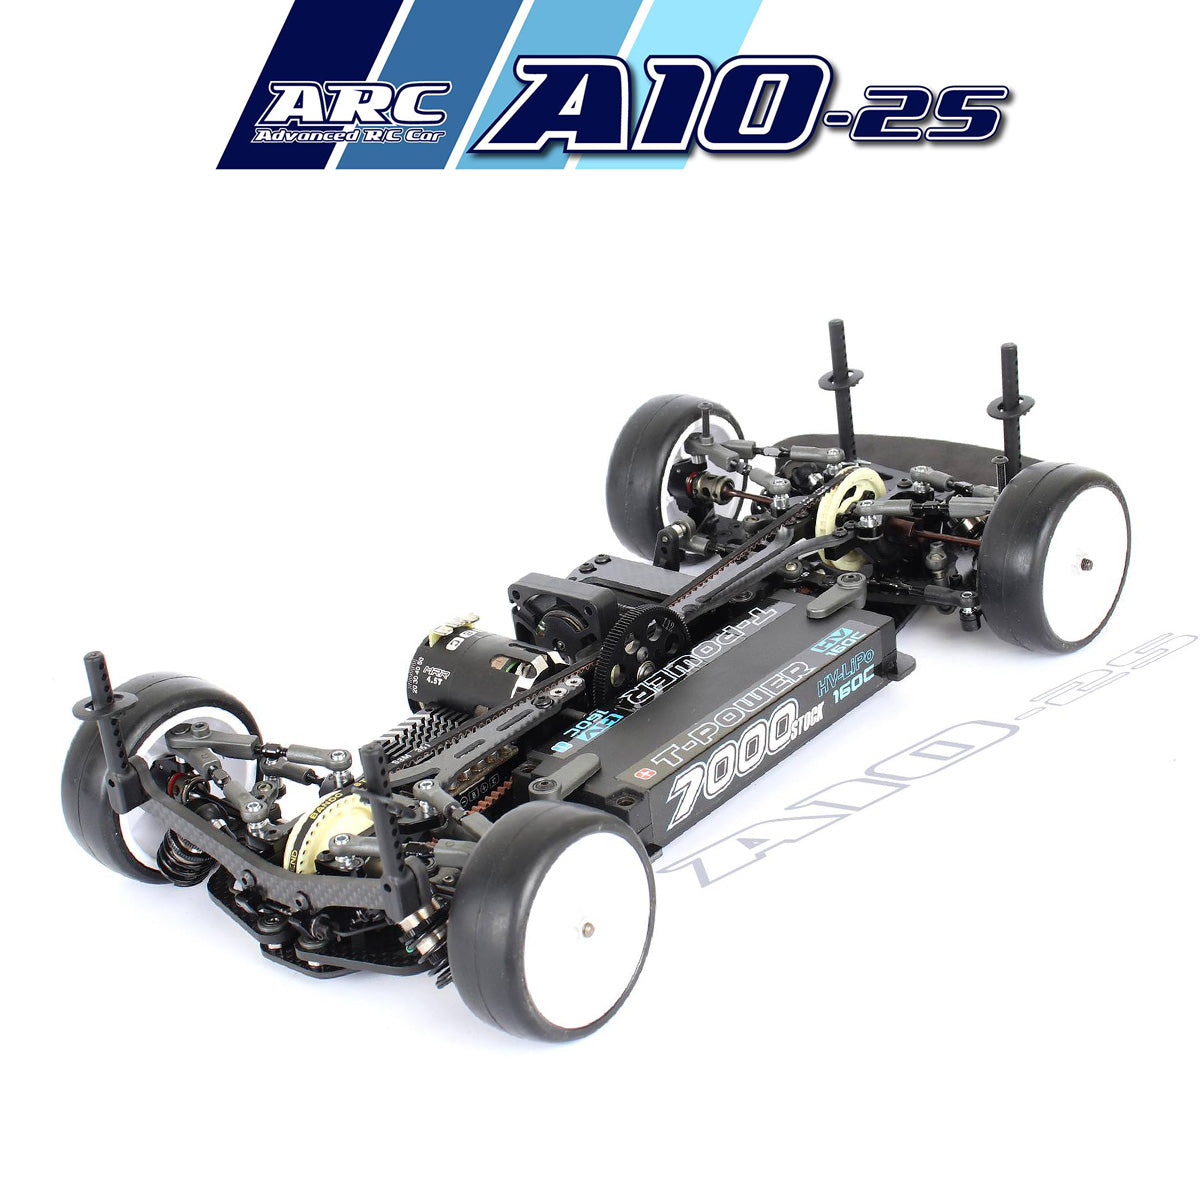 **Pre-order** ARC R100039 A10-25 Electric Touring Car Kit (Aluminum Chassis)